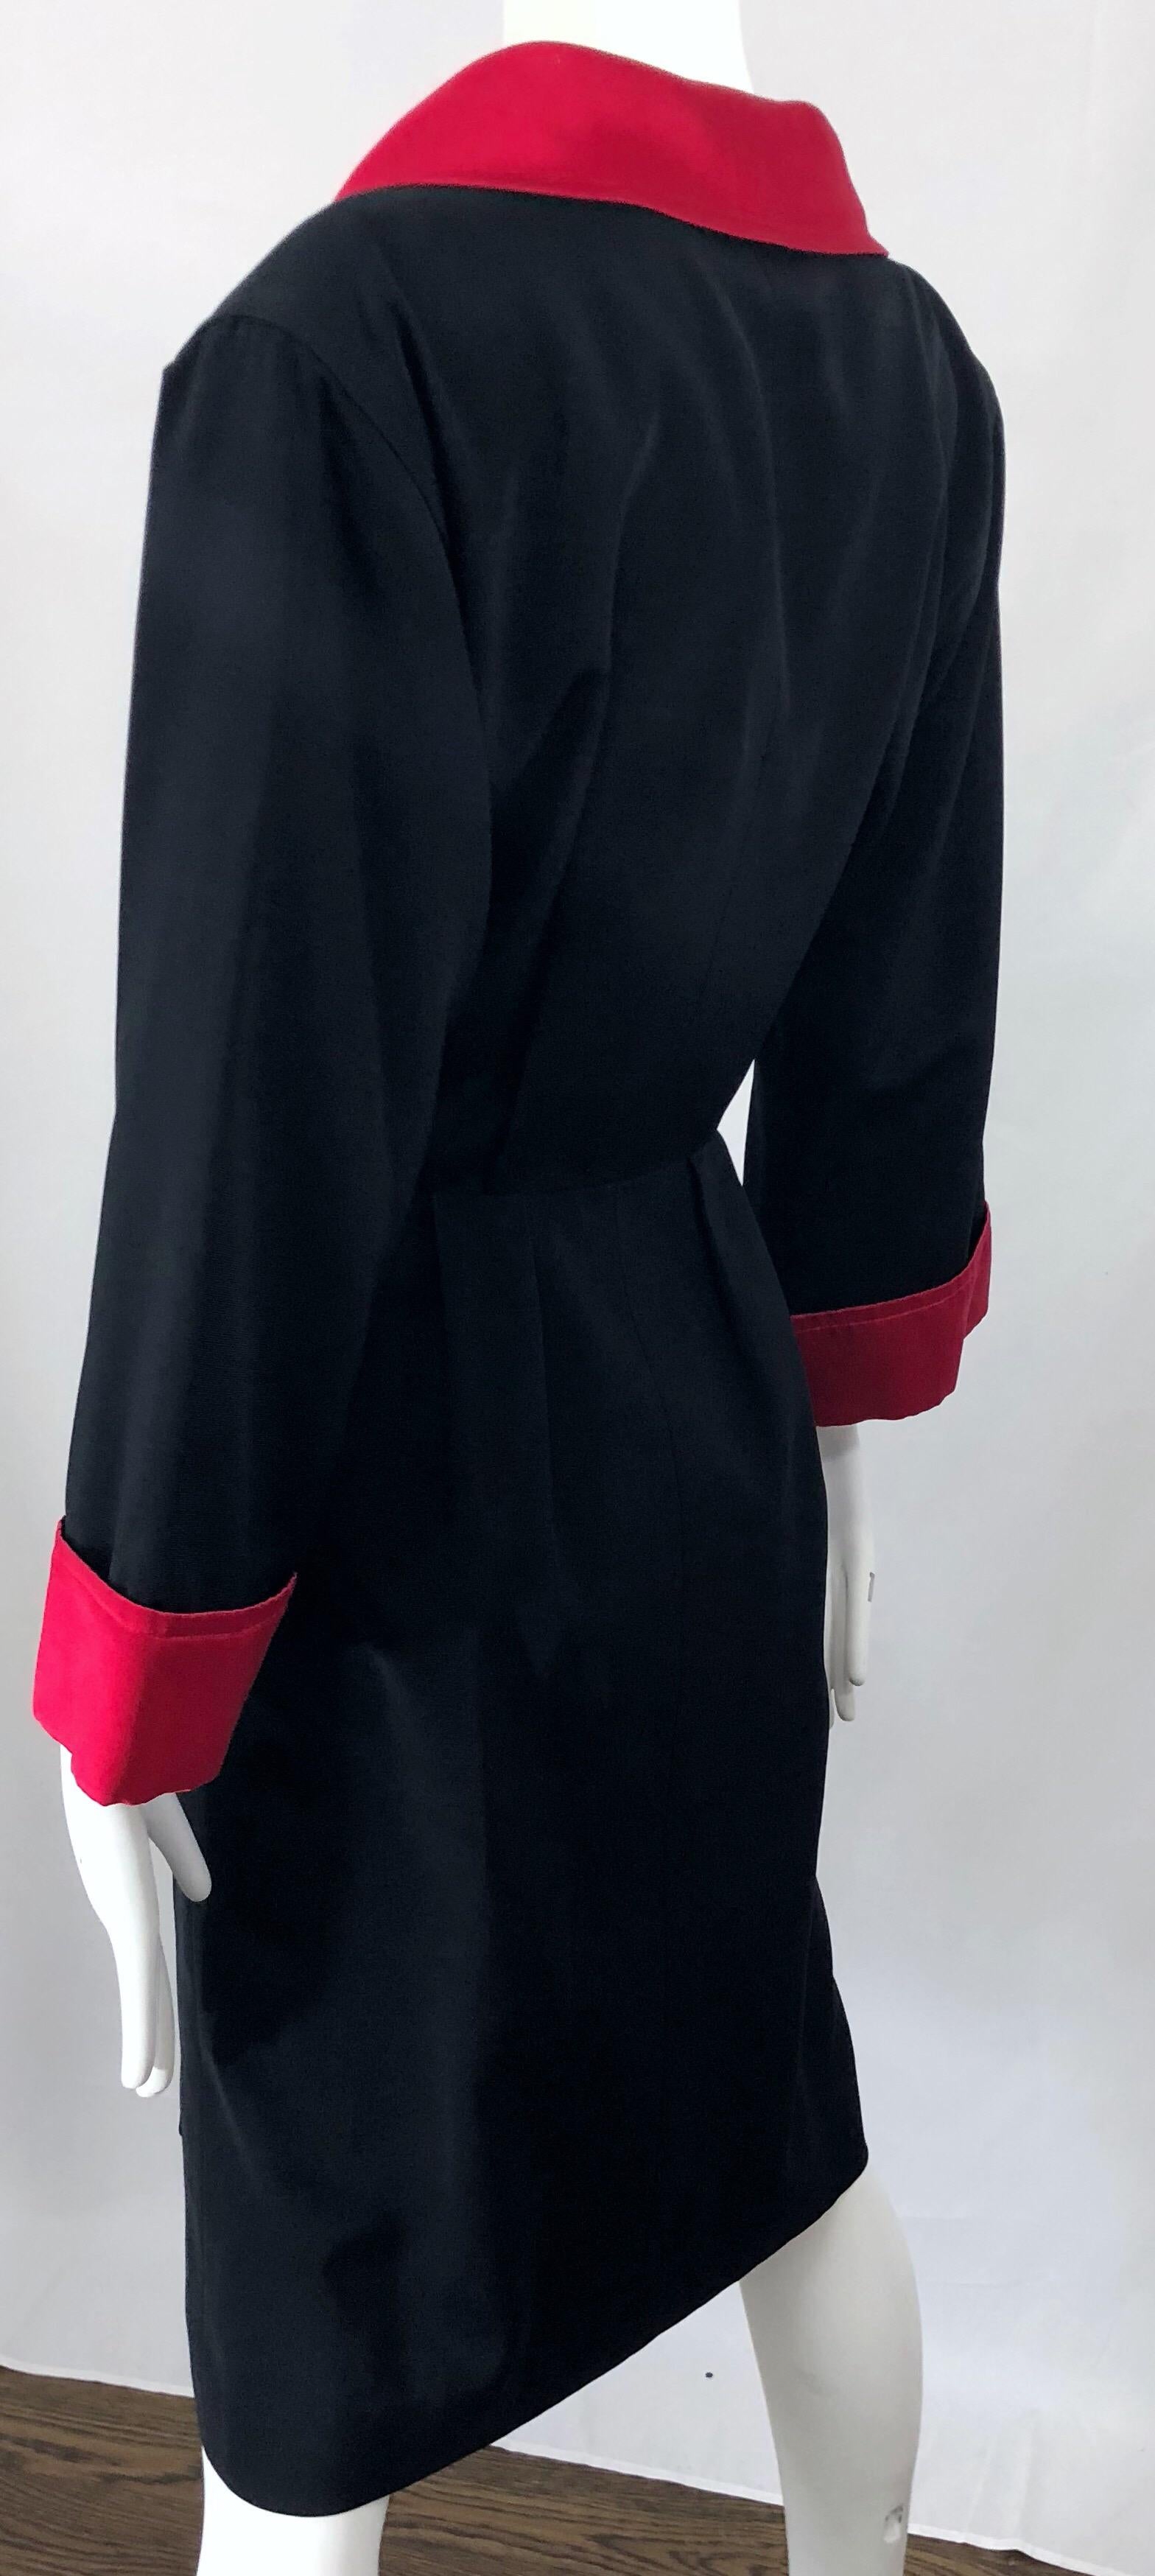 Women's Vintage Yves Saint Laurent Size 42 / 10 Black and Red Silk YSL Dress For Sale